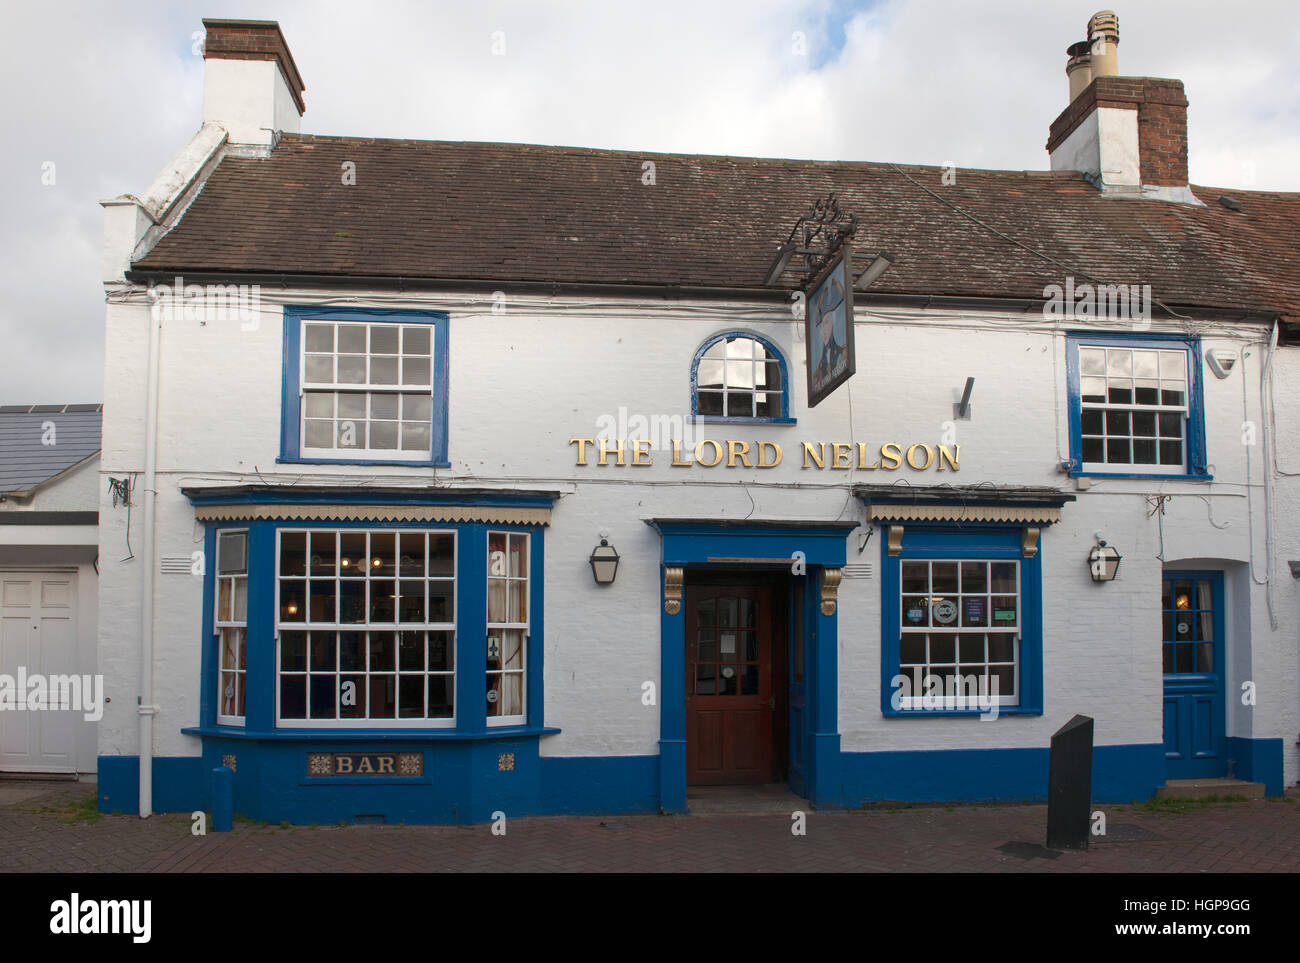 The Lord Nelson public house, High Street, Hythe, Hampshire, England, UK. Stock Photo